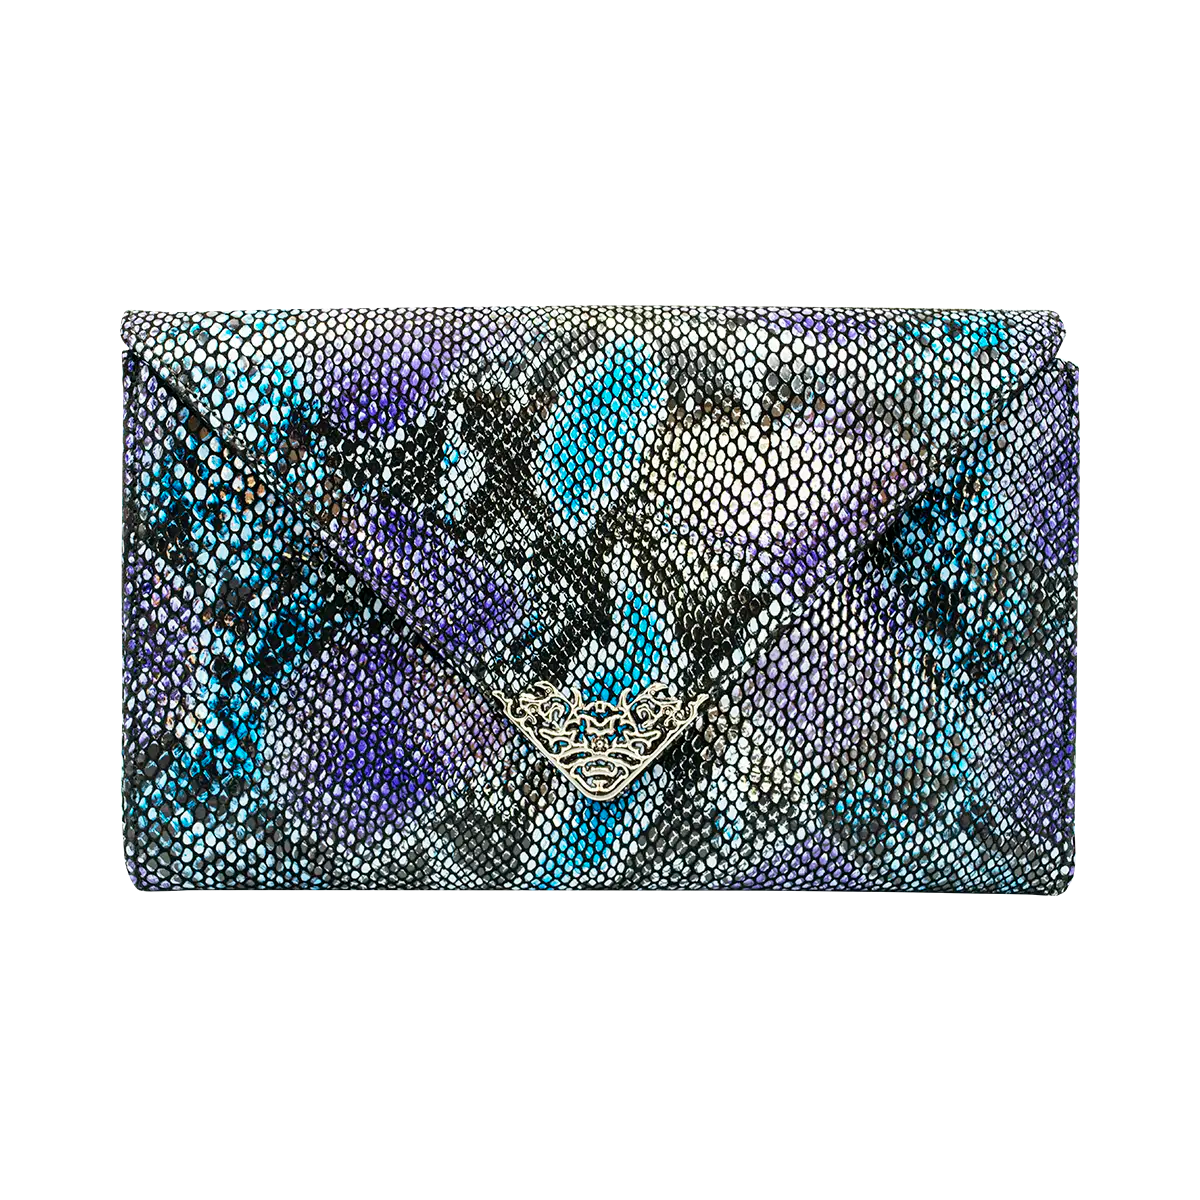 large blue print print leather clutch with strap. Fashion accessory for women in San Diego, CA.